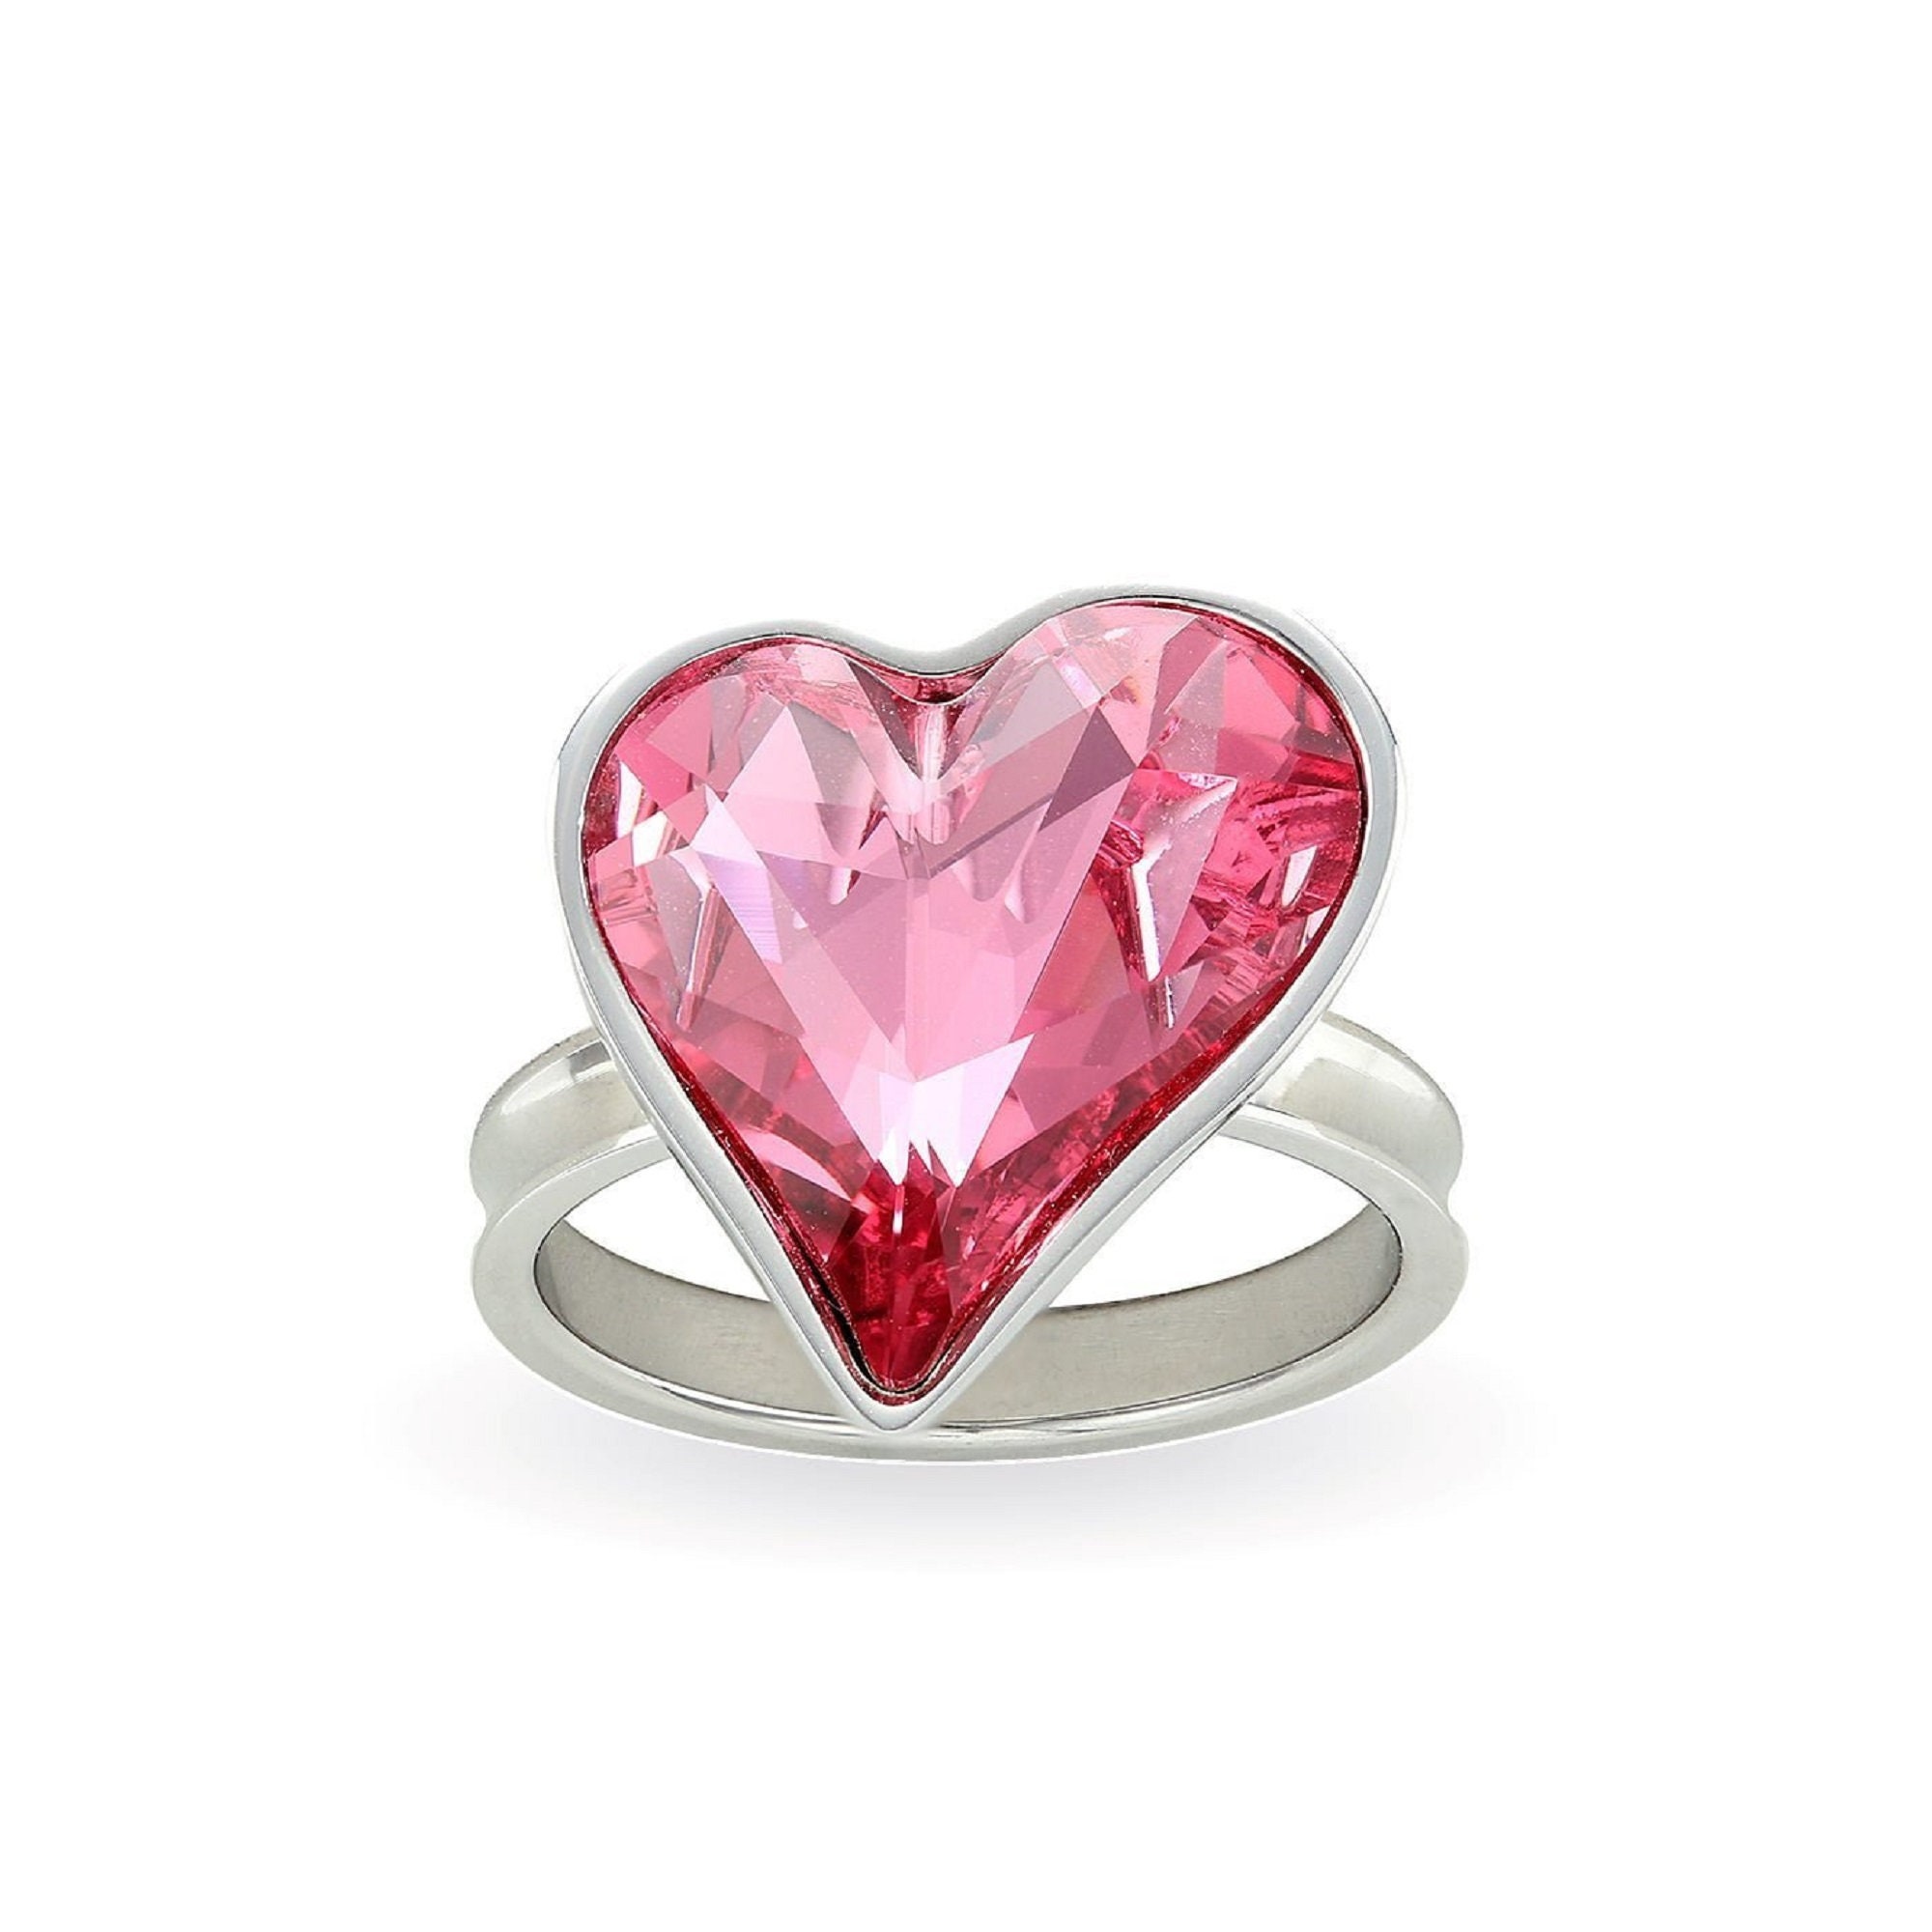 Swarovski Pink Heart Ring Big Sparkly Crystal Shaped Cocktail Statement Handmade Romantic Gift For Women